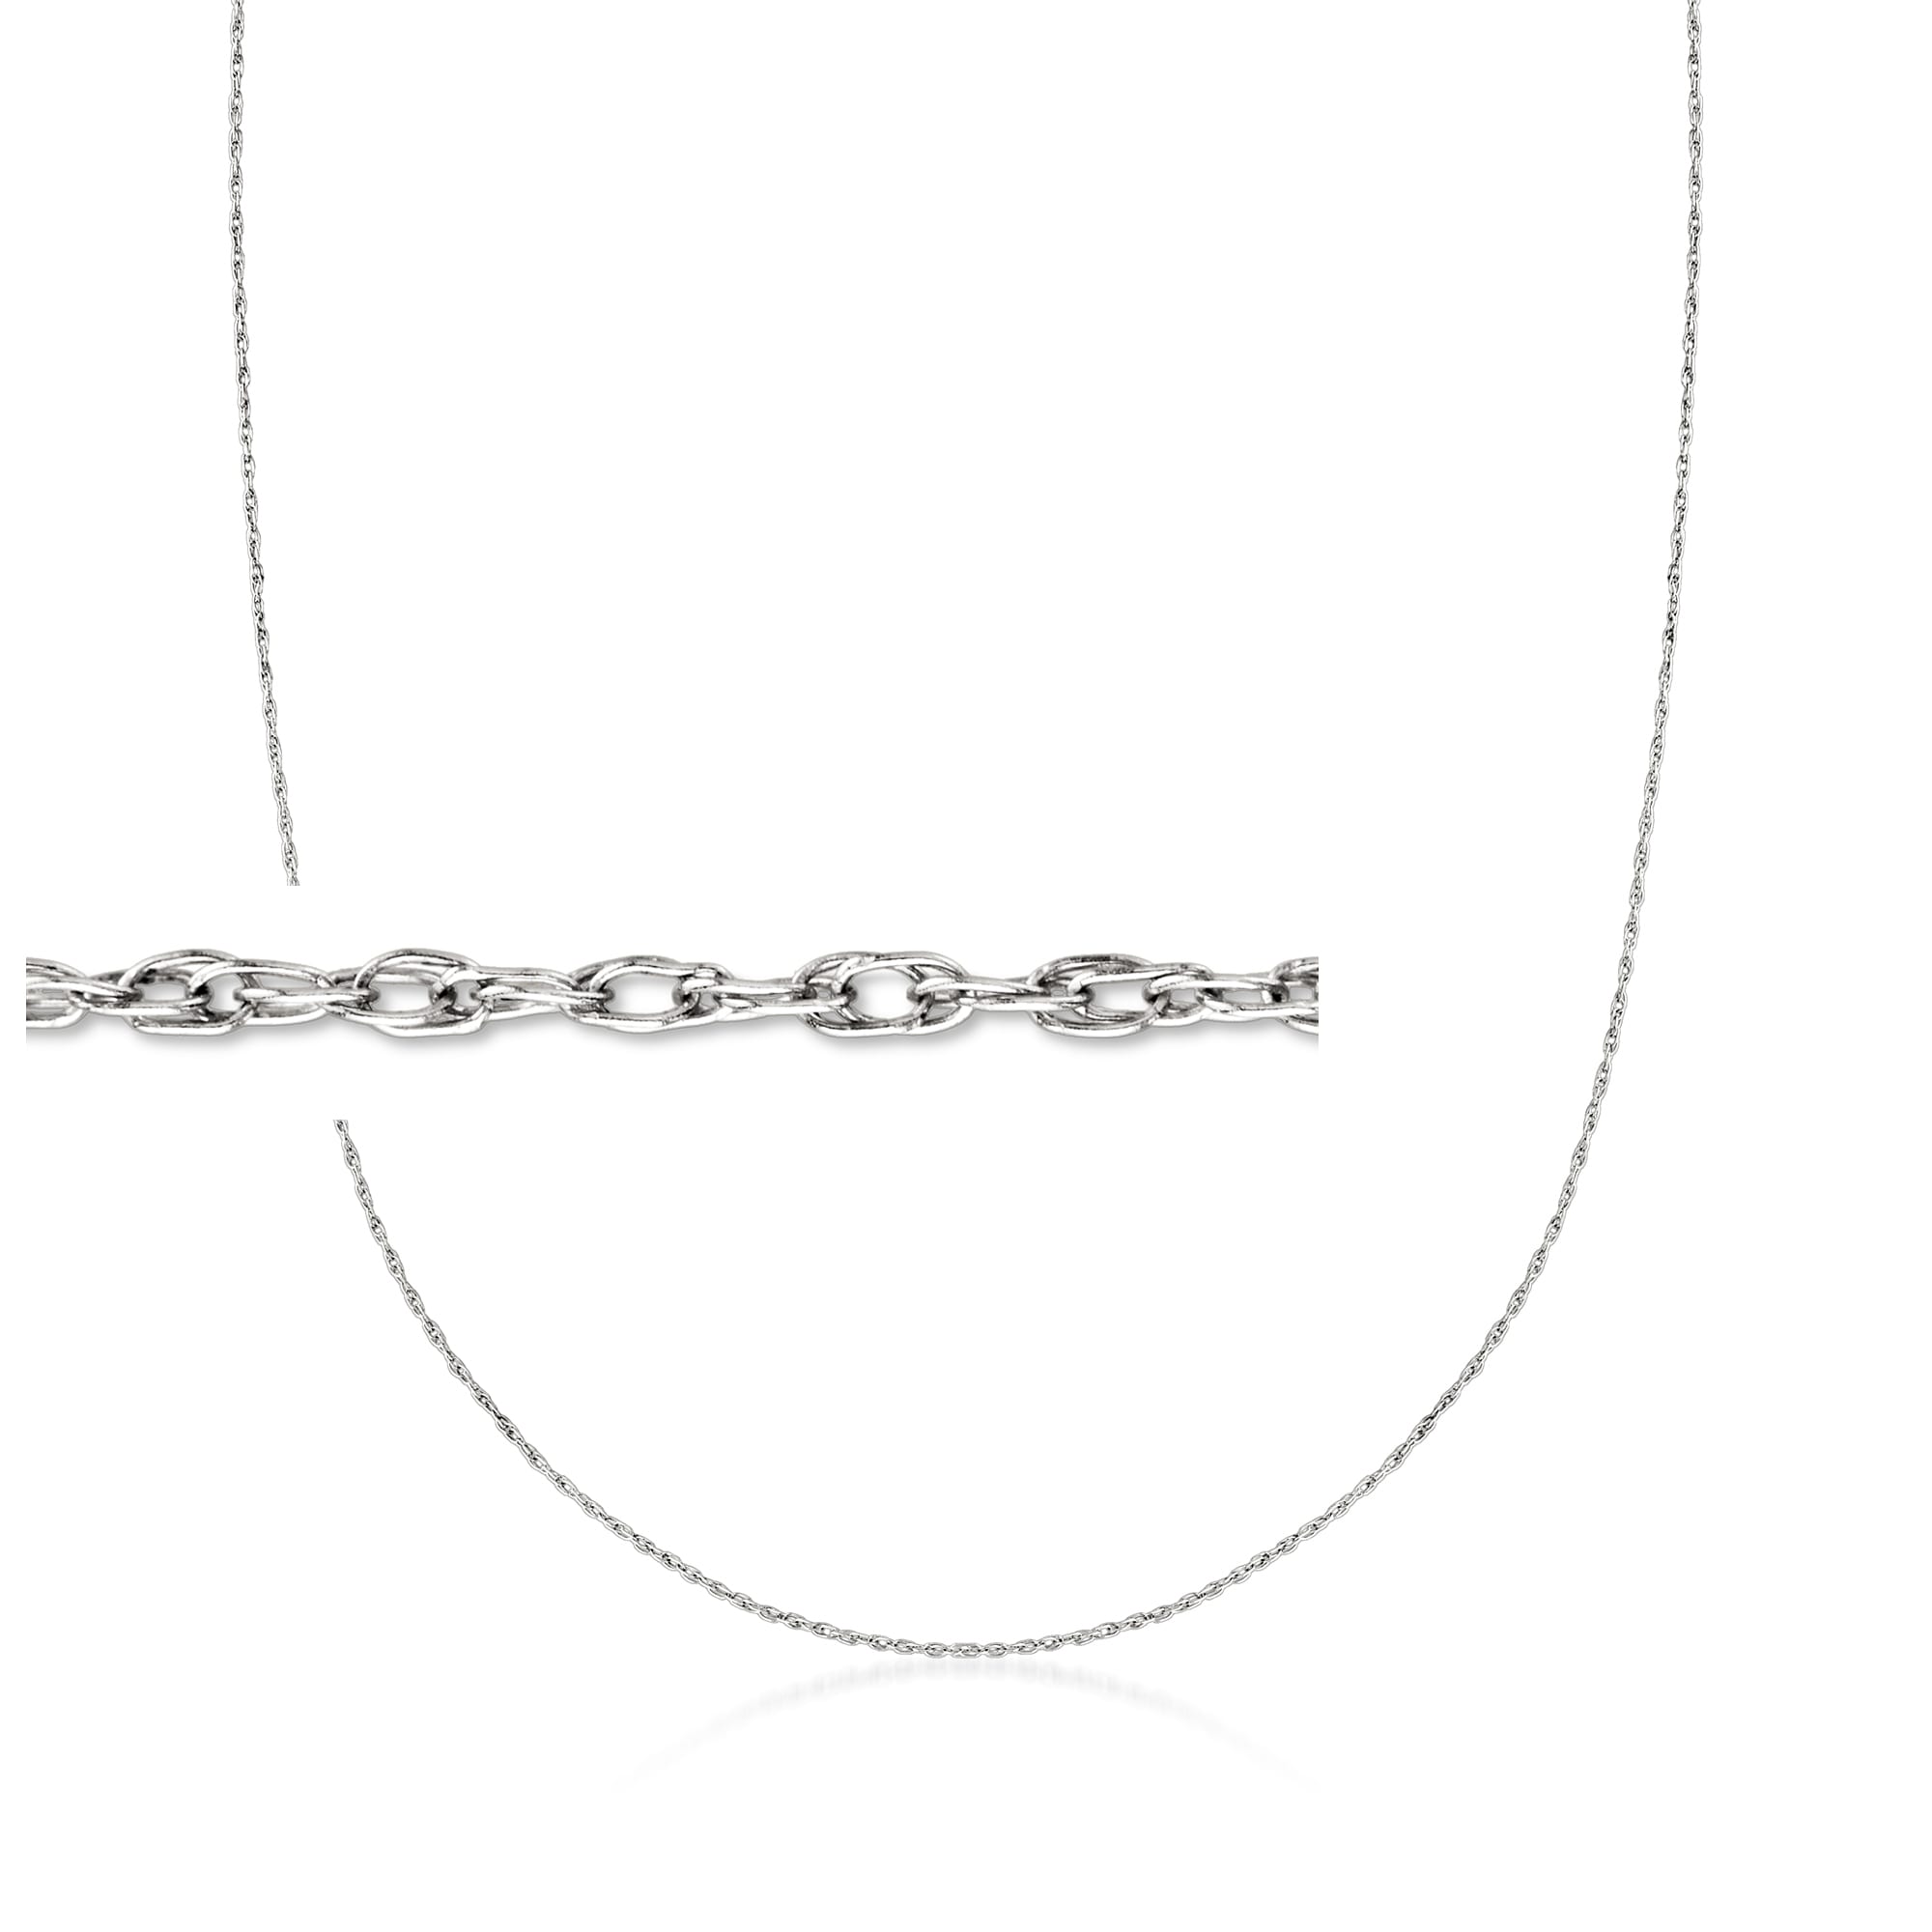 7mm 14kt White Gold Rope-Chain Necklace | Ross-Simons